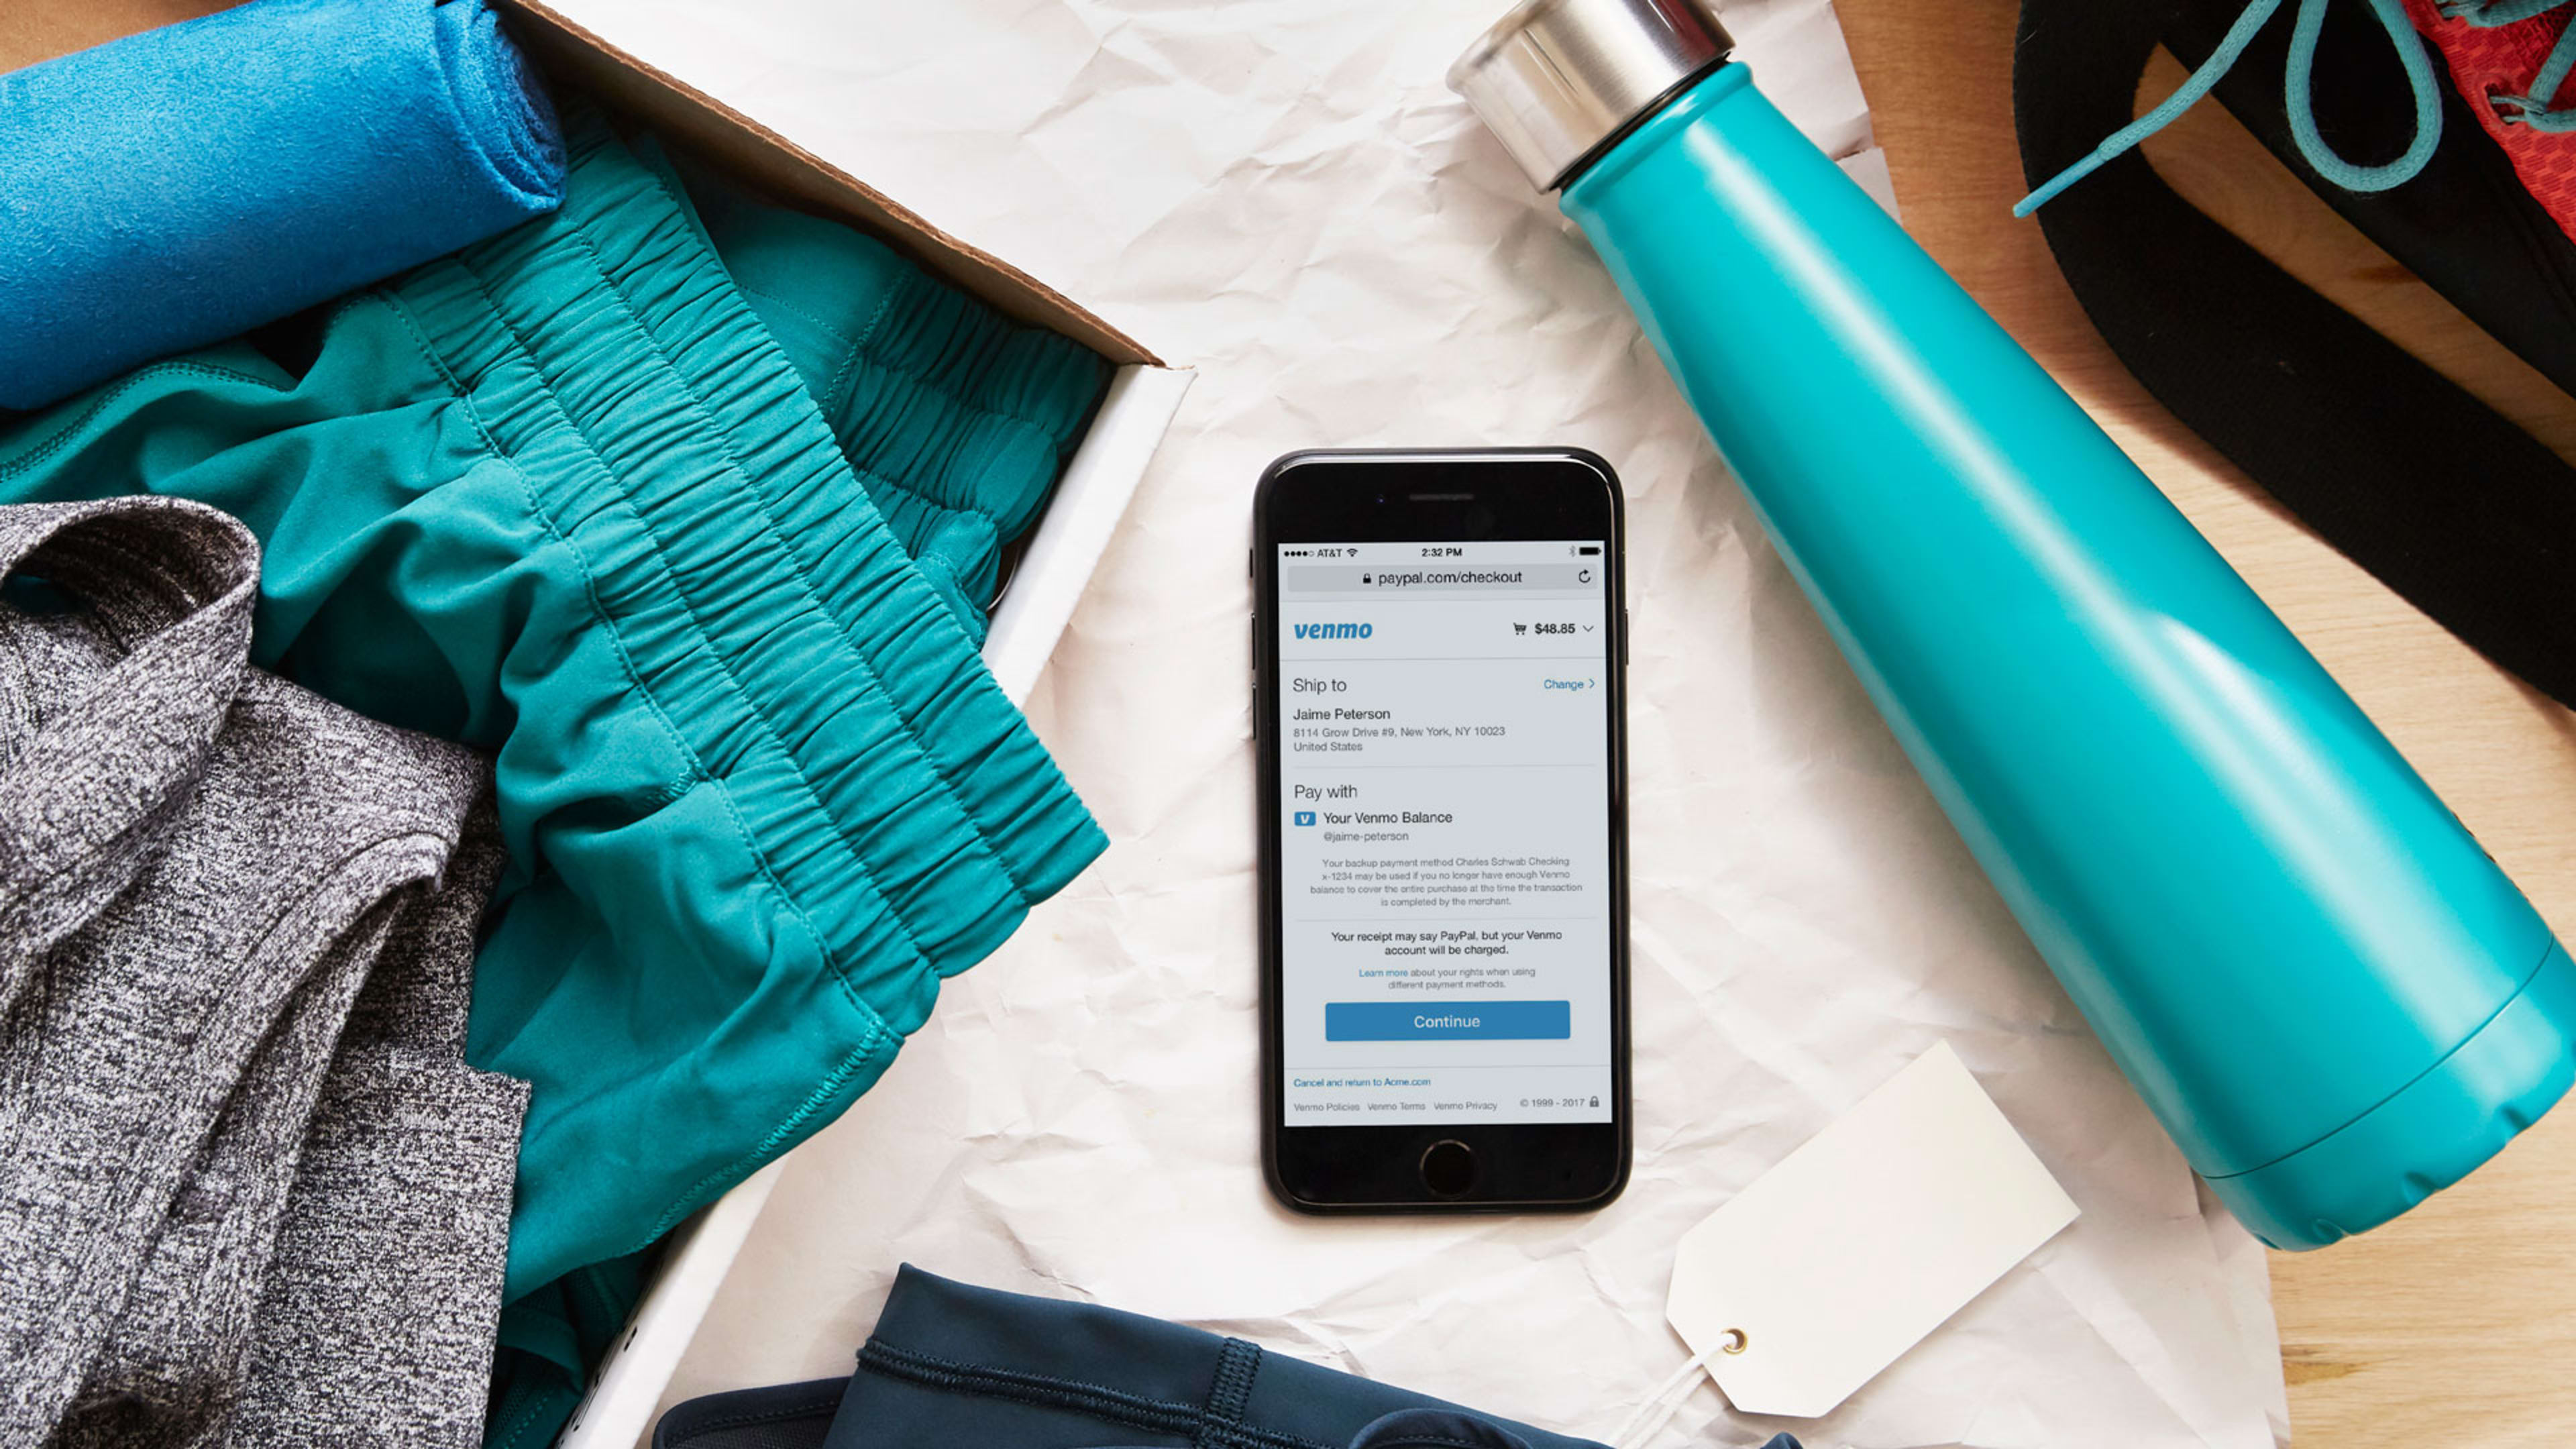 PayPal expands “pay with Venmo” to 2 million online retailers